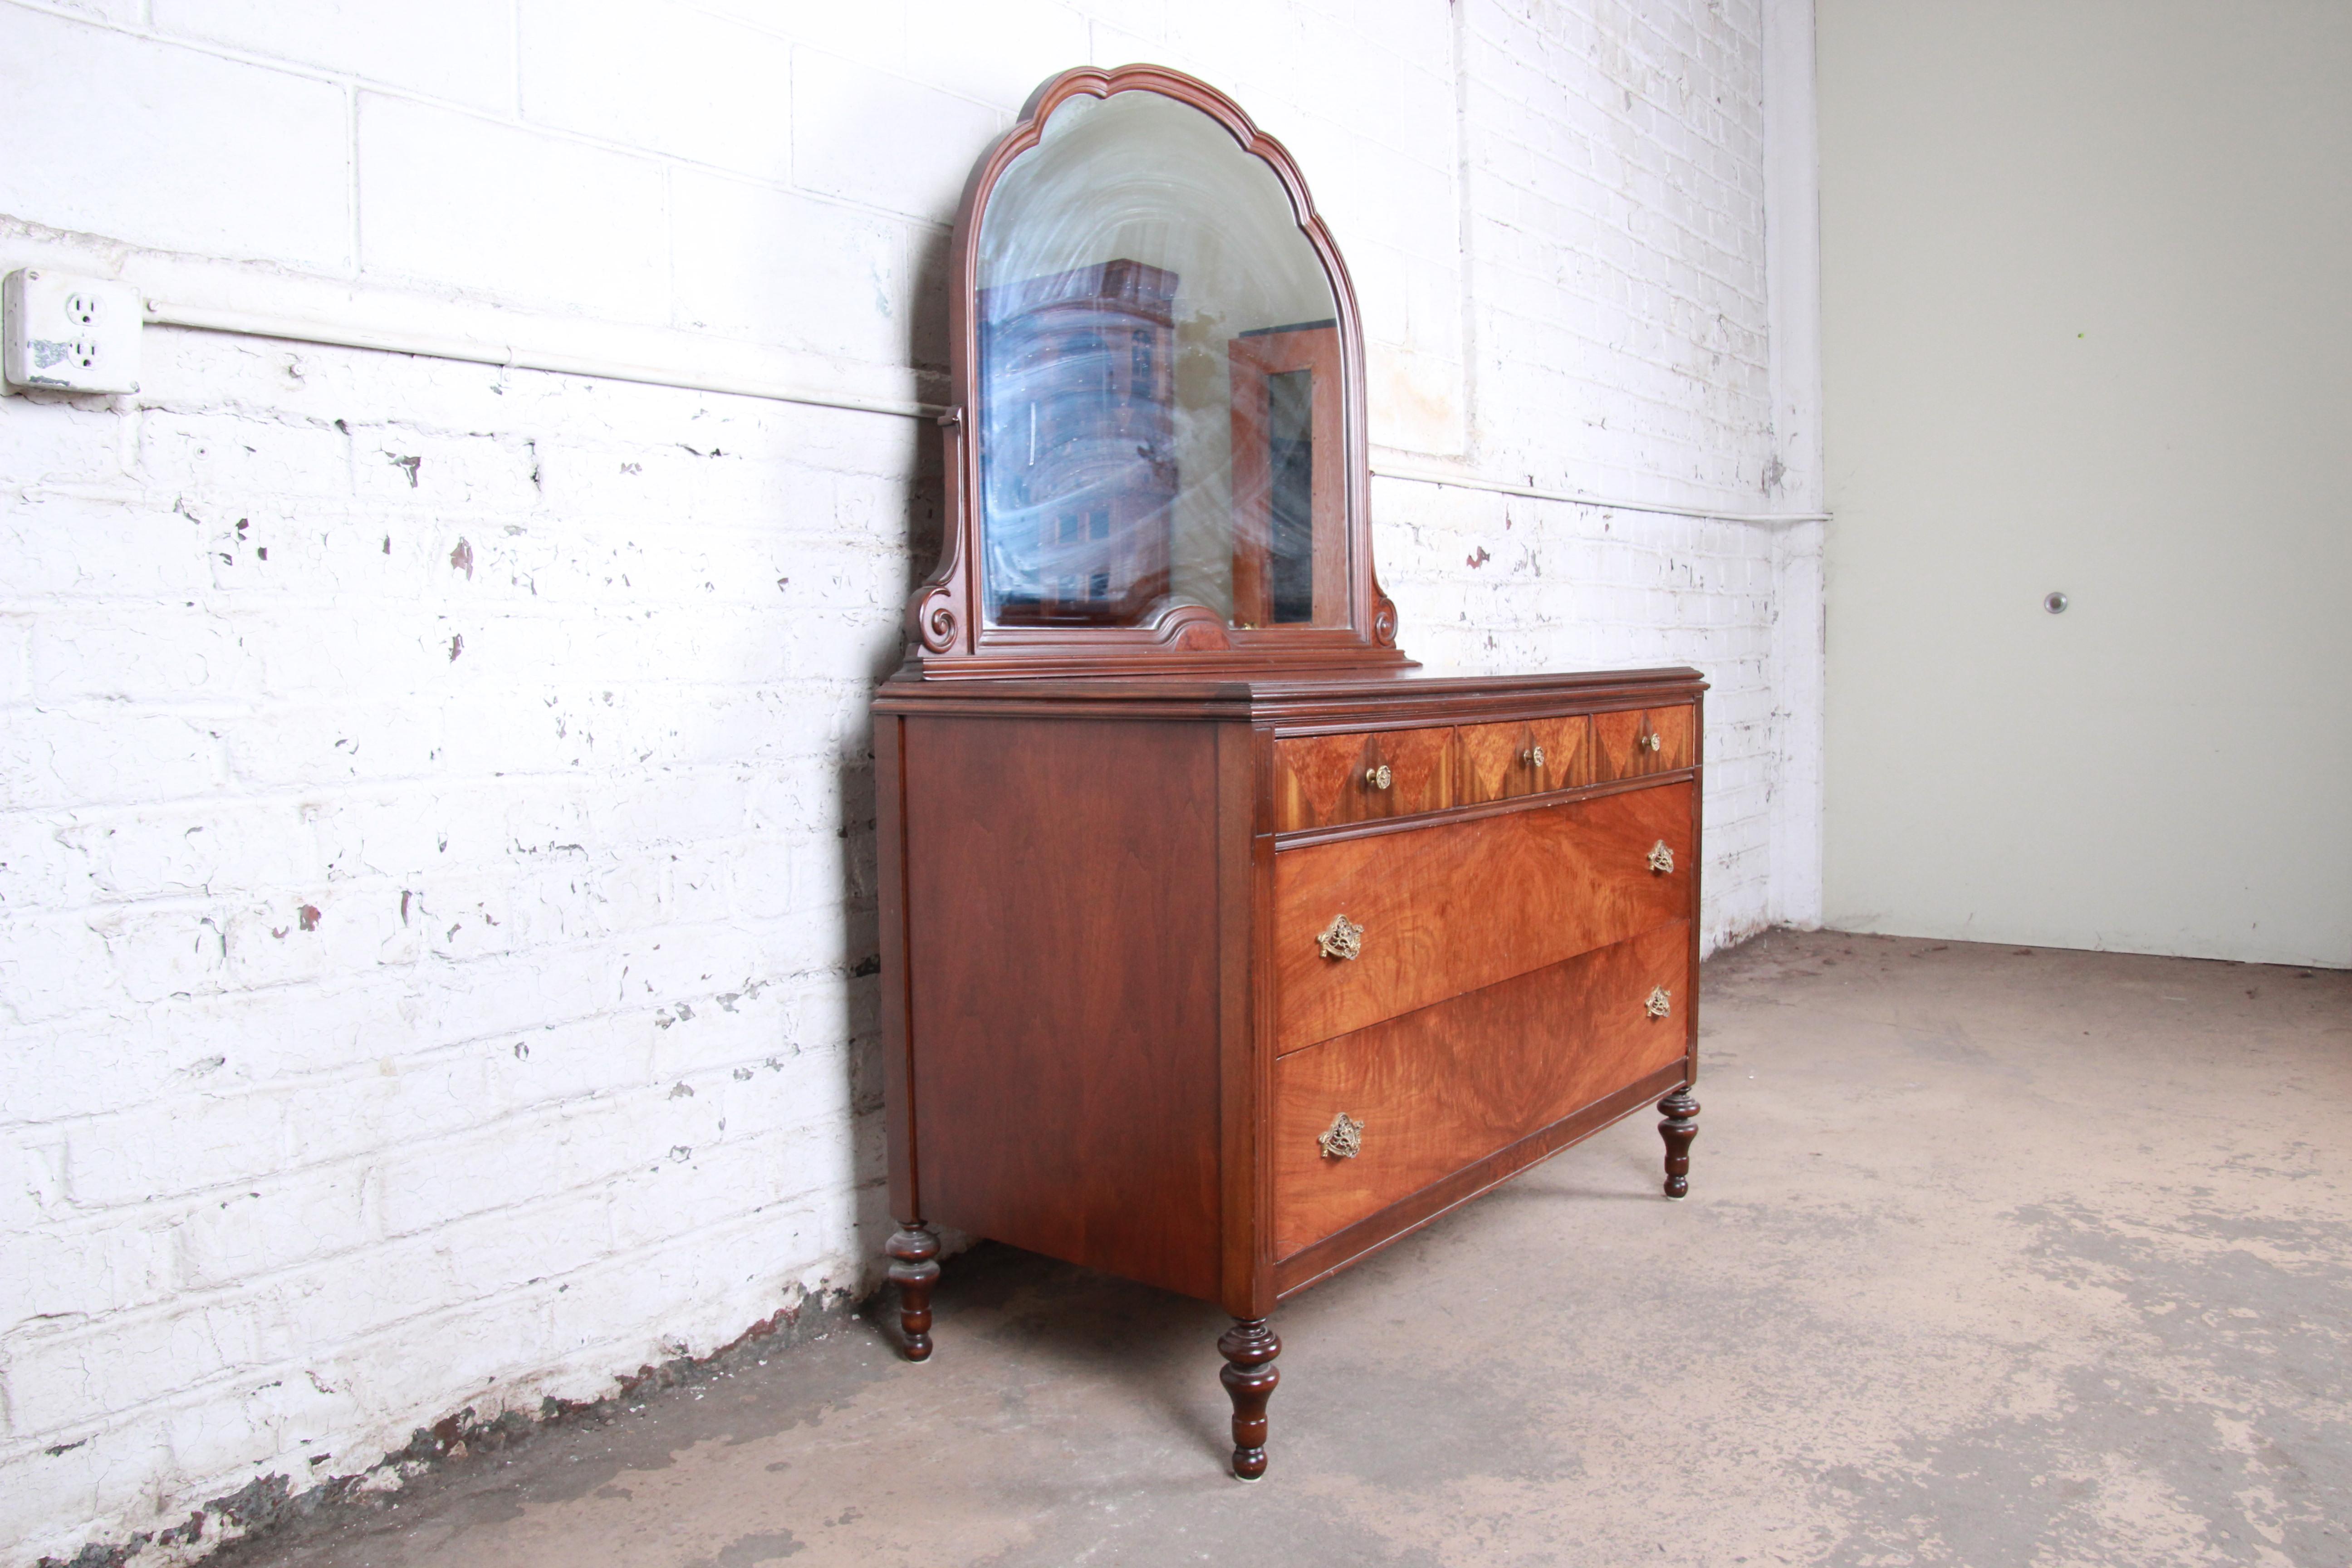 An exceptional antique burled walnut five-drawer dresser with mirror

Attributed to Baker Furniture

USA, circa 1920s

Burled walnut and brass hardware and mirror

Measures: 50